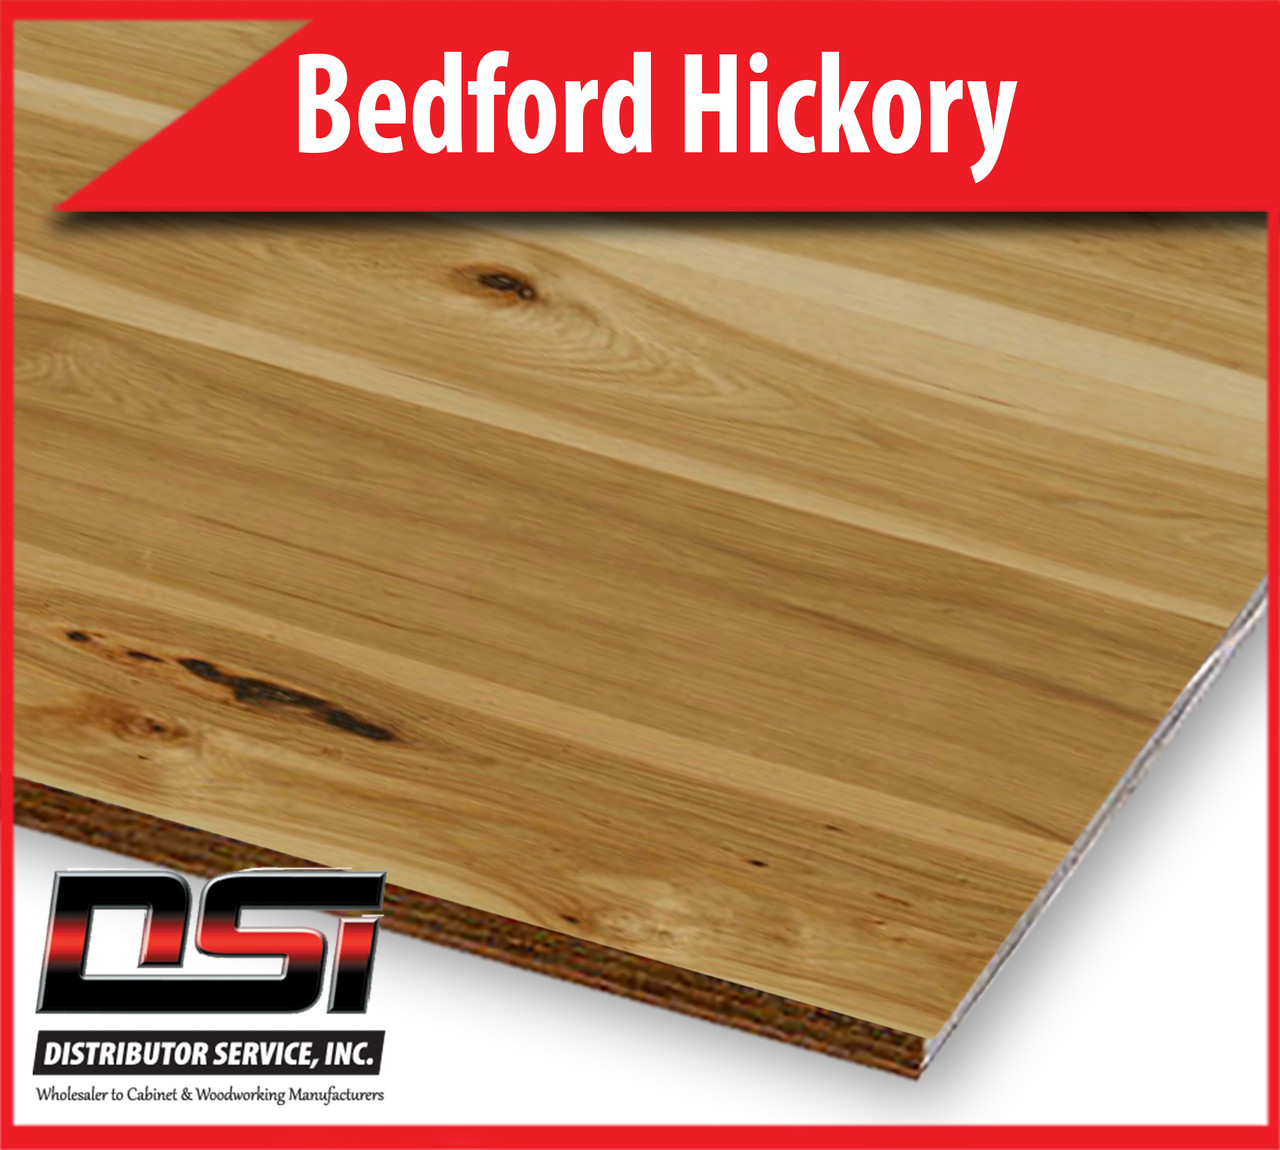 Bedford Hickory Plywood Plain Sliced Veneer Core 3-6" Flitches G2S 1/2" x 4x8